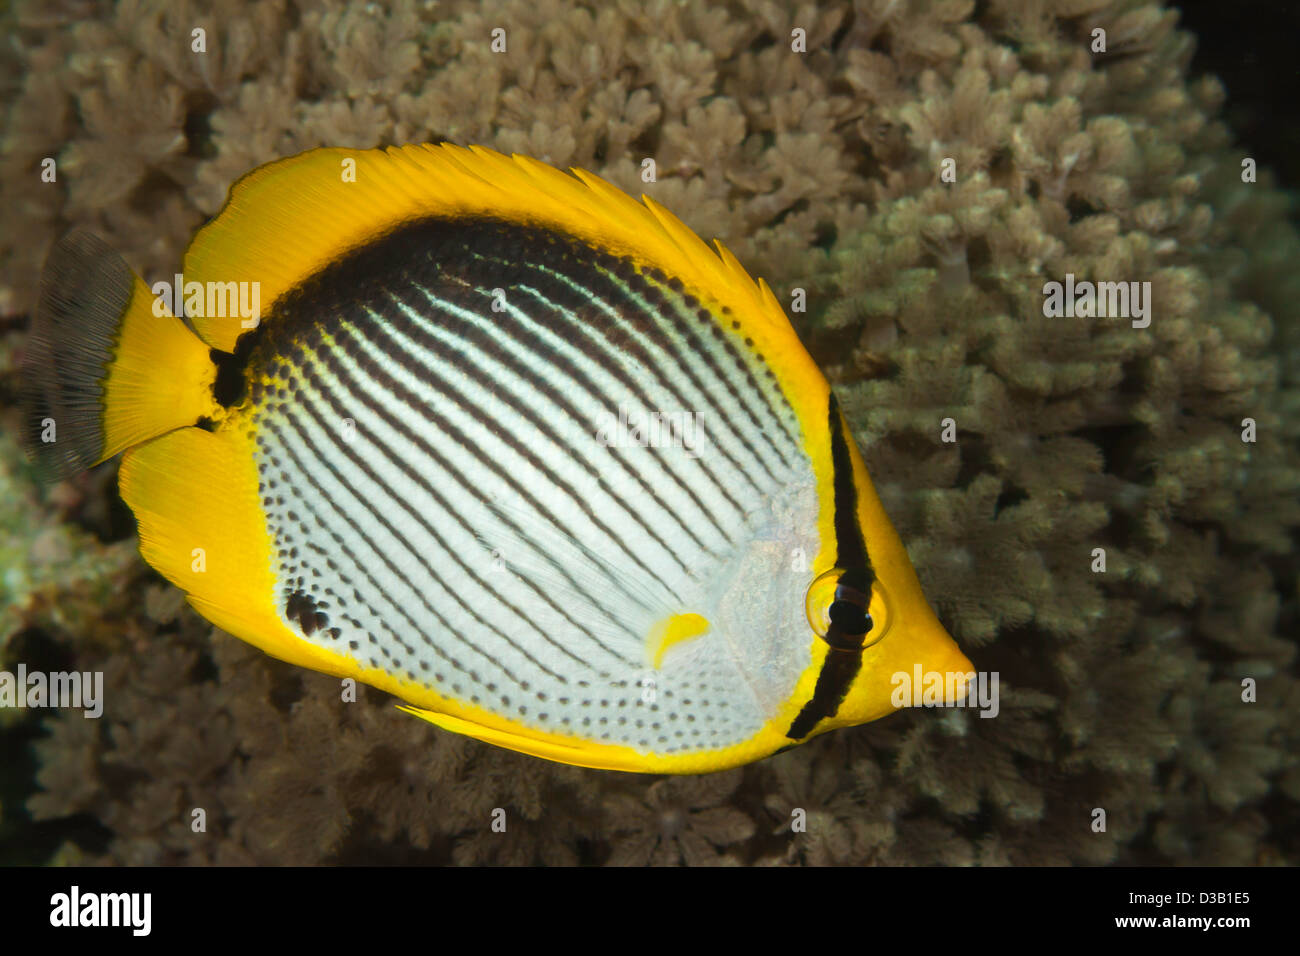 This black-back butterflyfish, Chaetodon melannotus, was photographed in Tubbataha Reef National Park, Philippines. Stock Photo